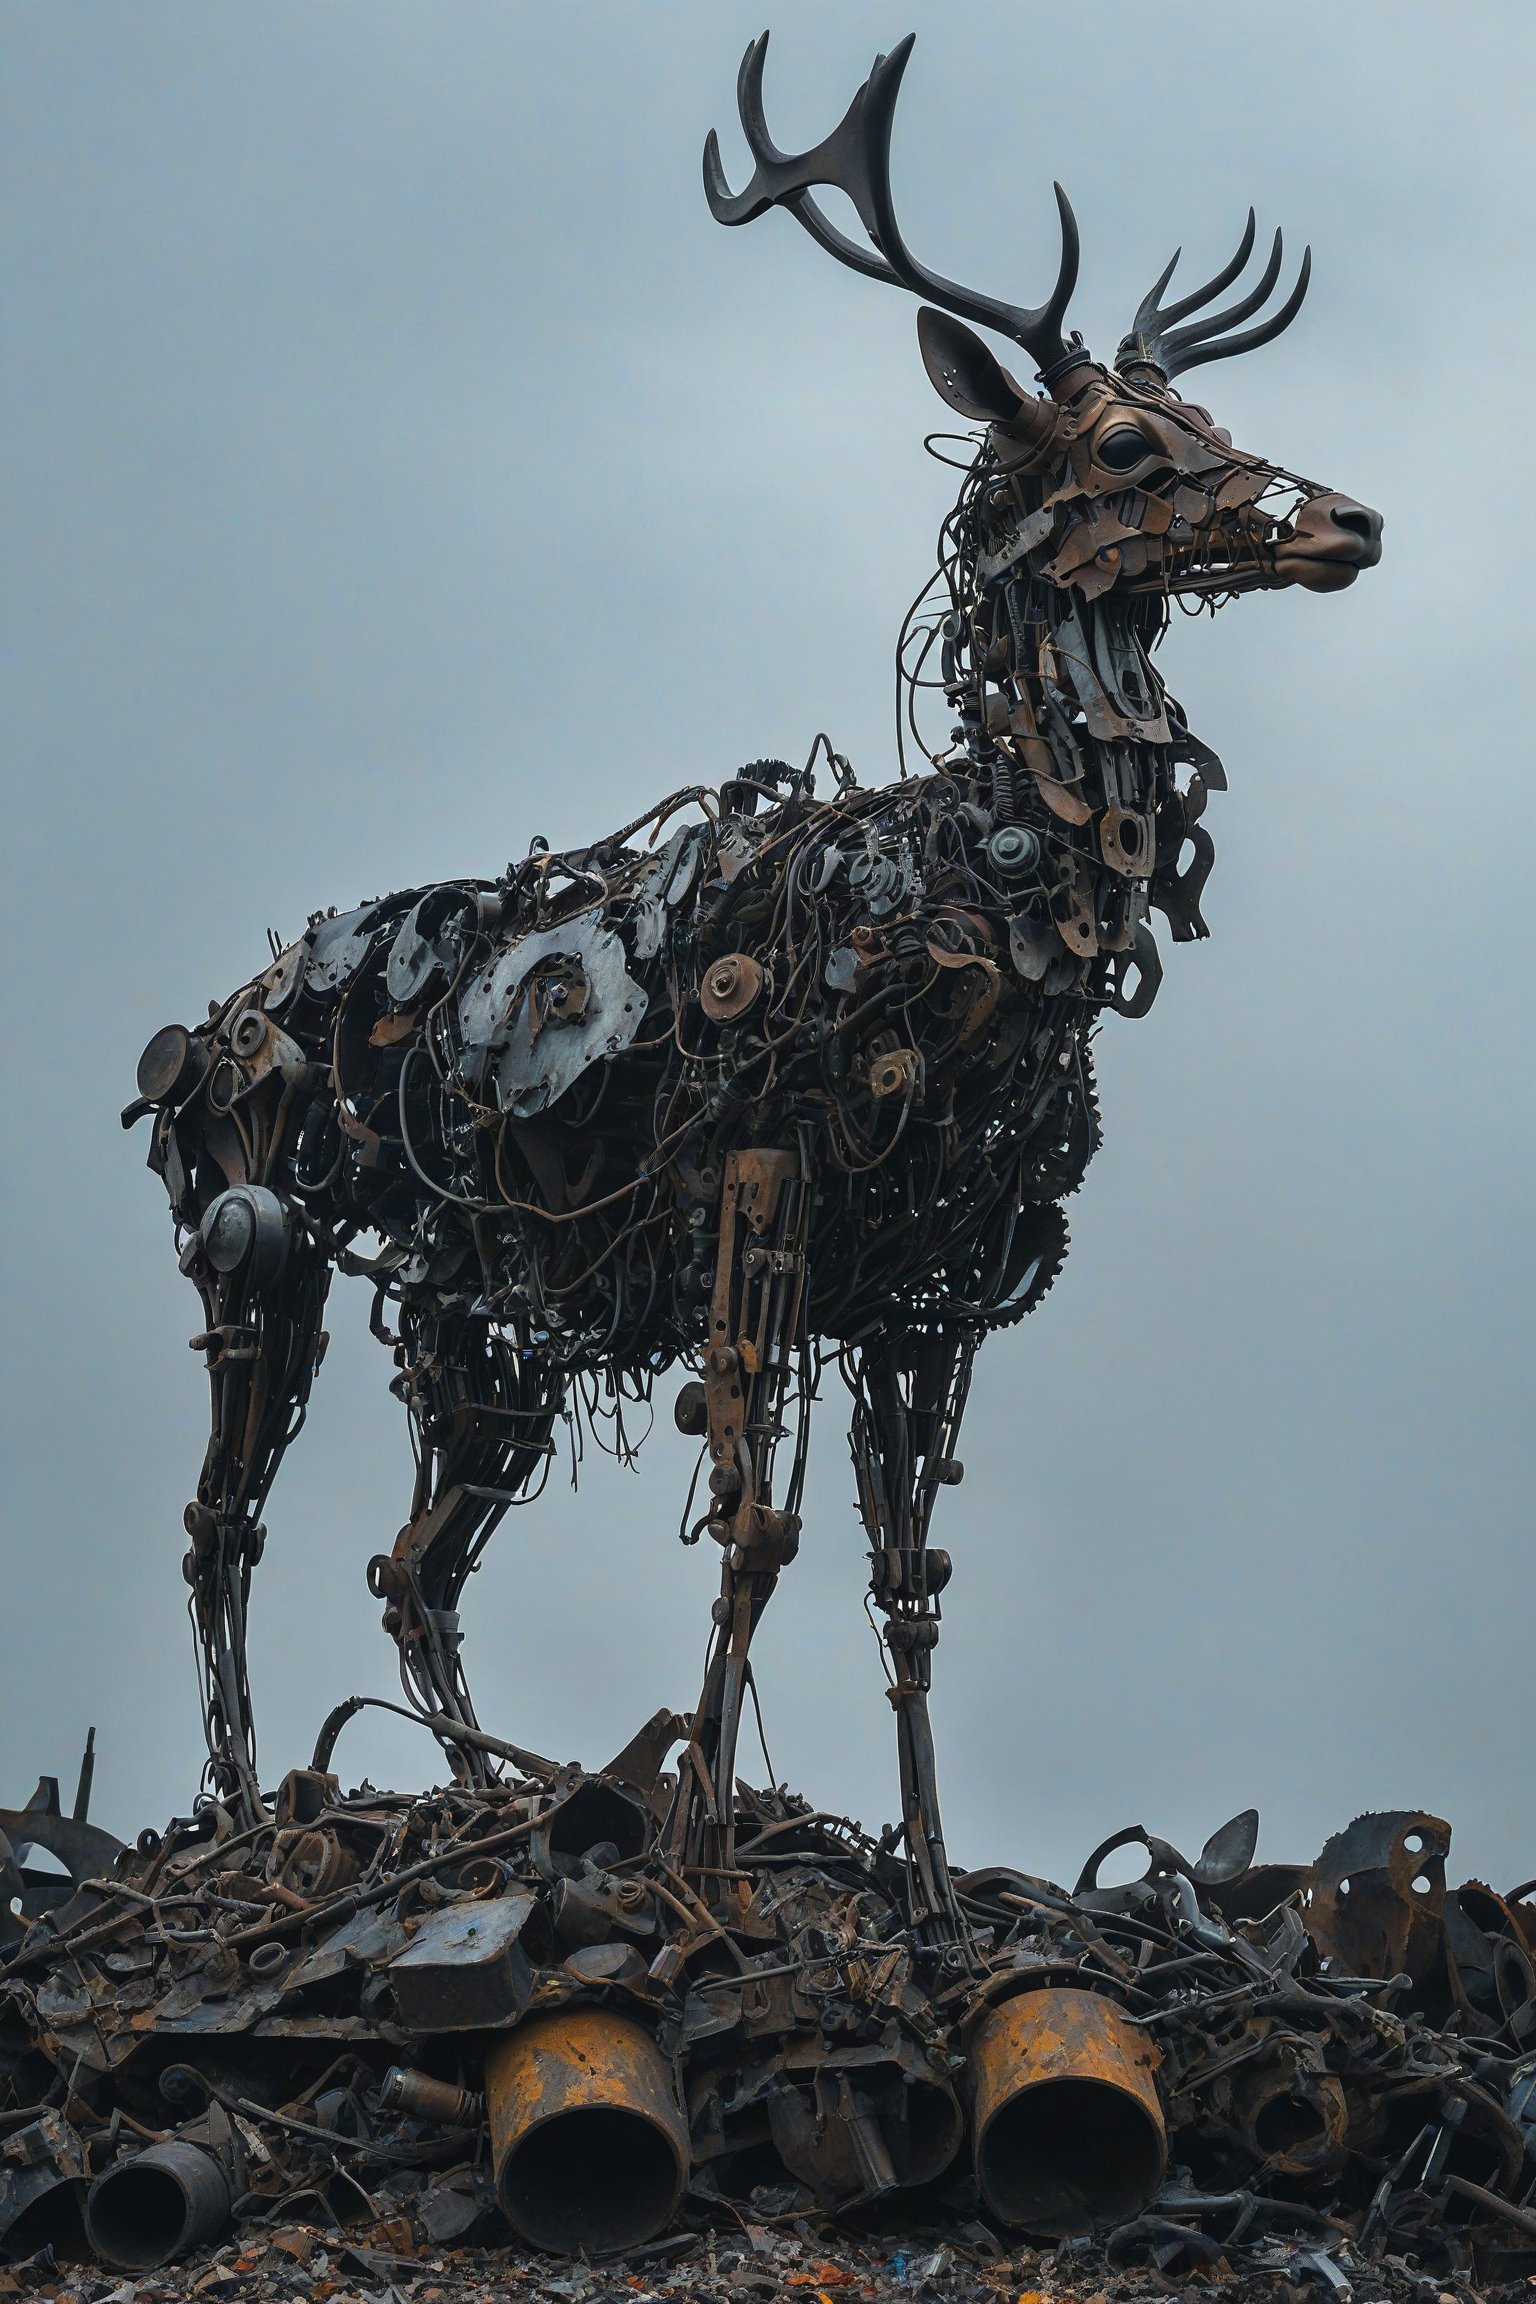 A towering, intricately constructed mechanical deer standing atop a mound of discarded metal and debris. The deer appears to be made of various metal parts, wires, and tools, giving it a skeletal and mechanical appearance. The background is overcast, adding a somber and post-apocalyptic feel to the scene.